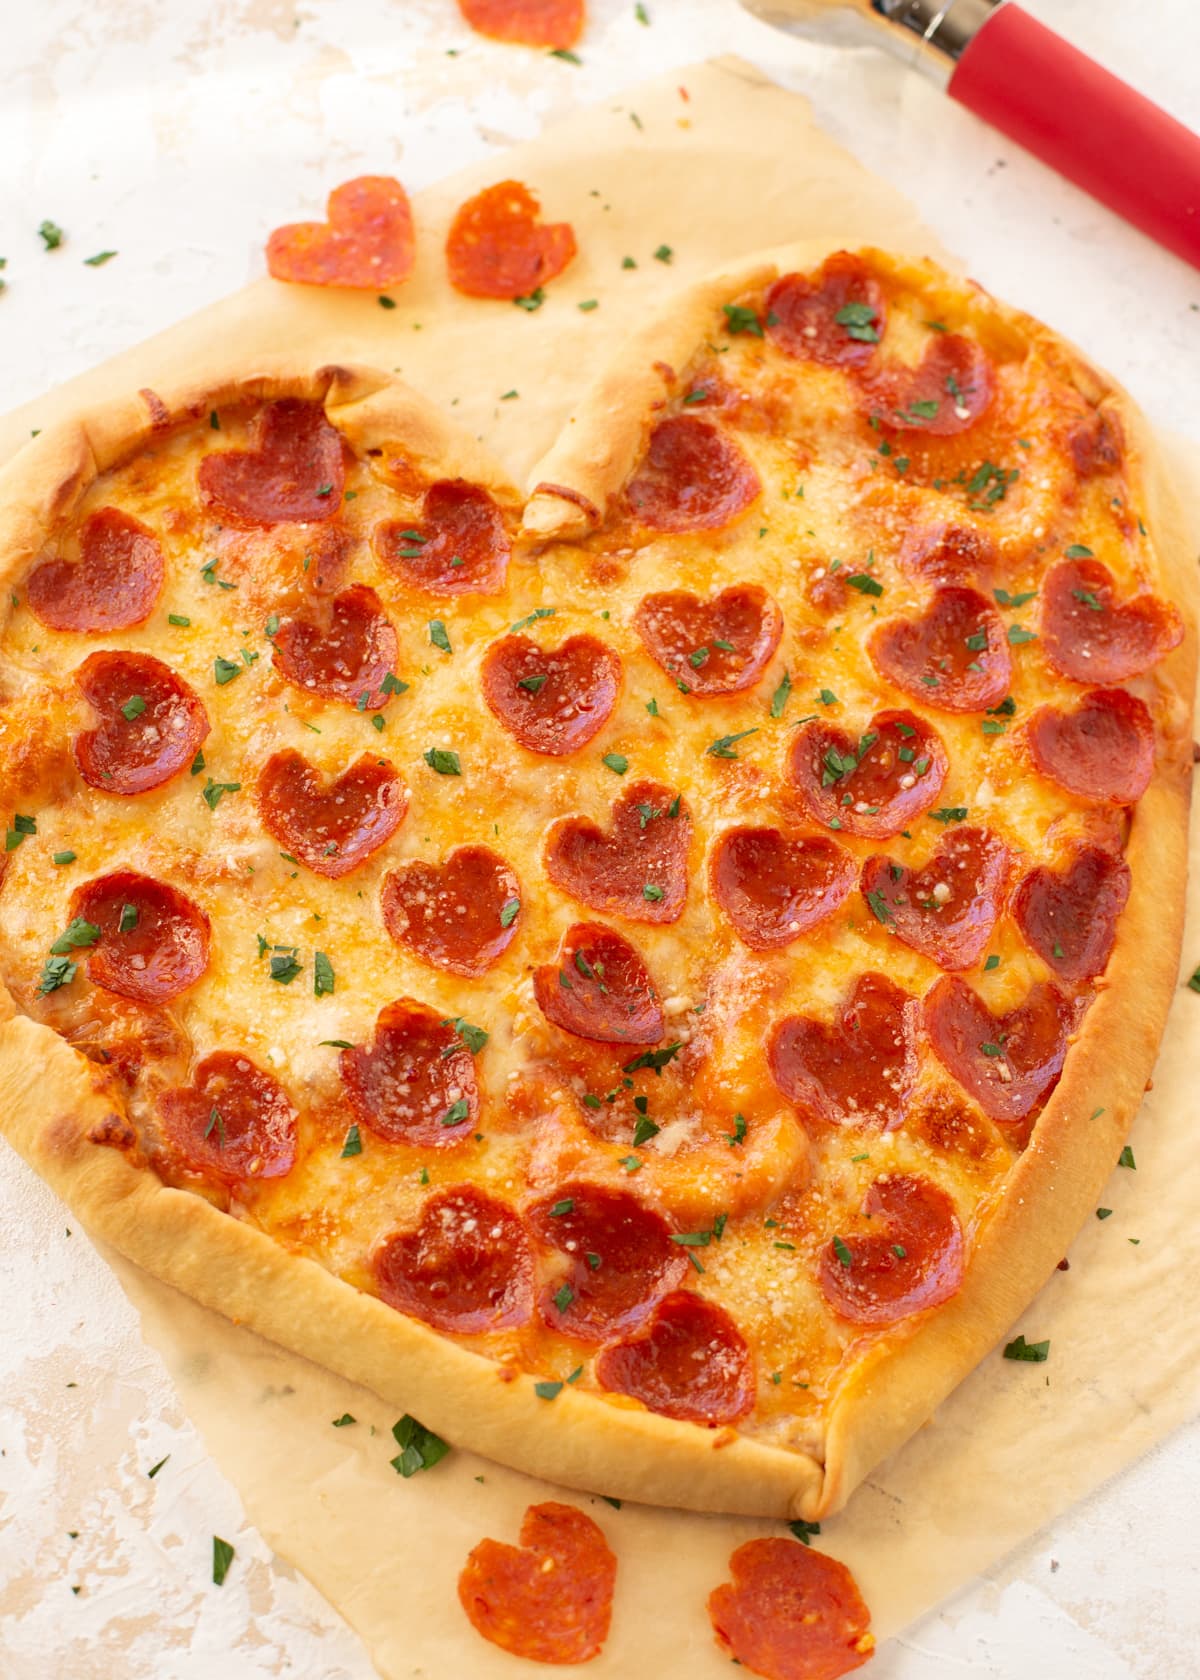 Completed Valentines Pizza covered in heart pepperonis.